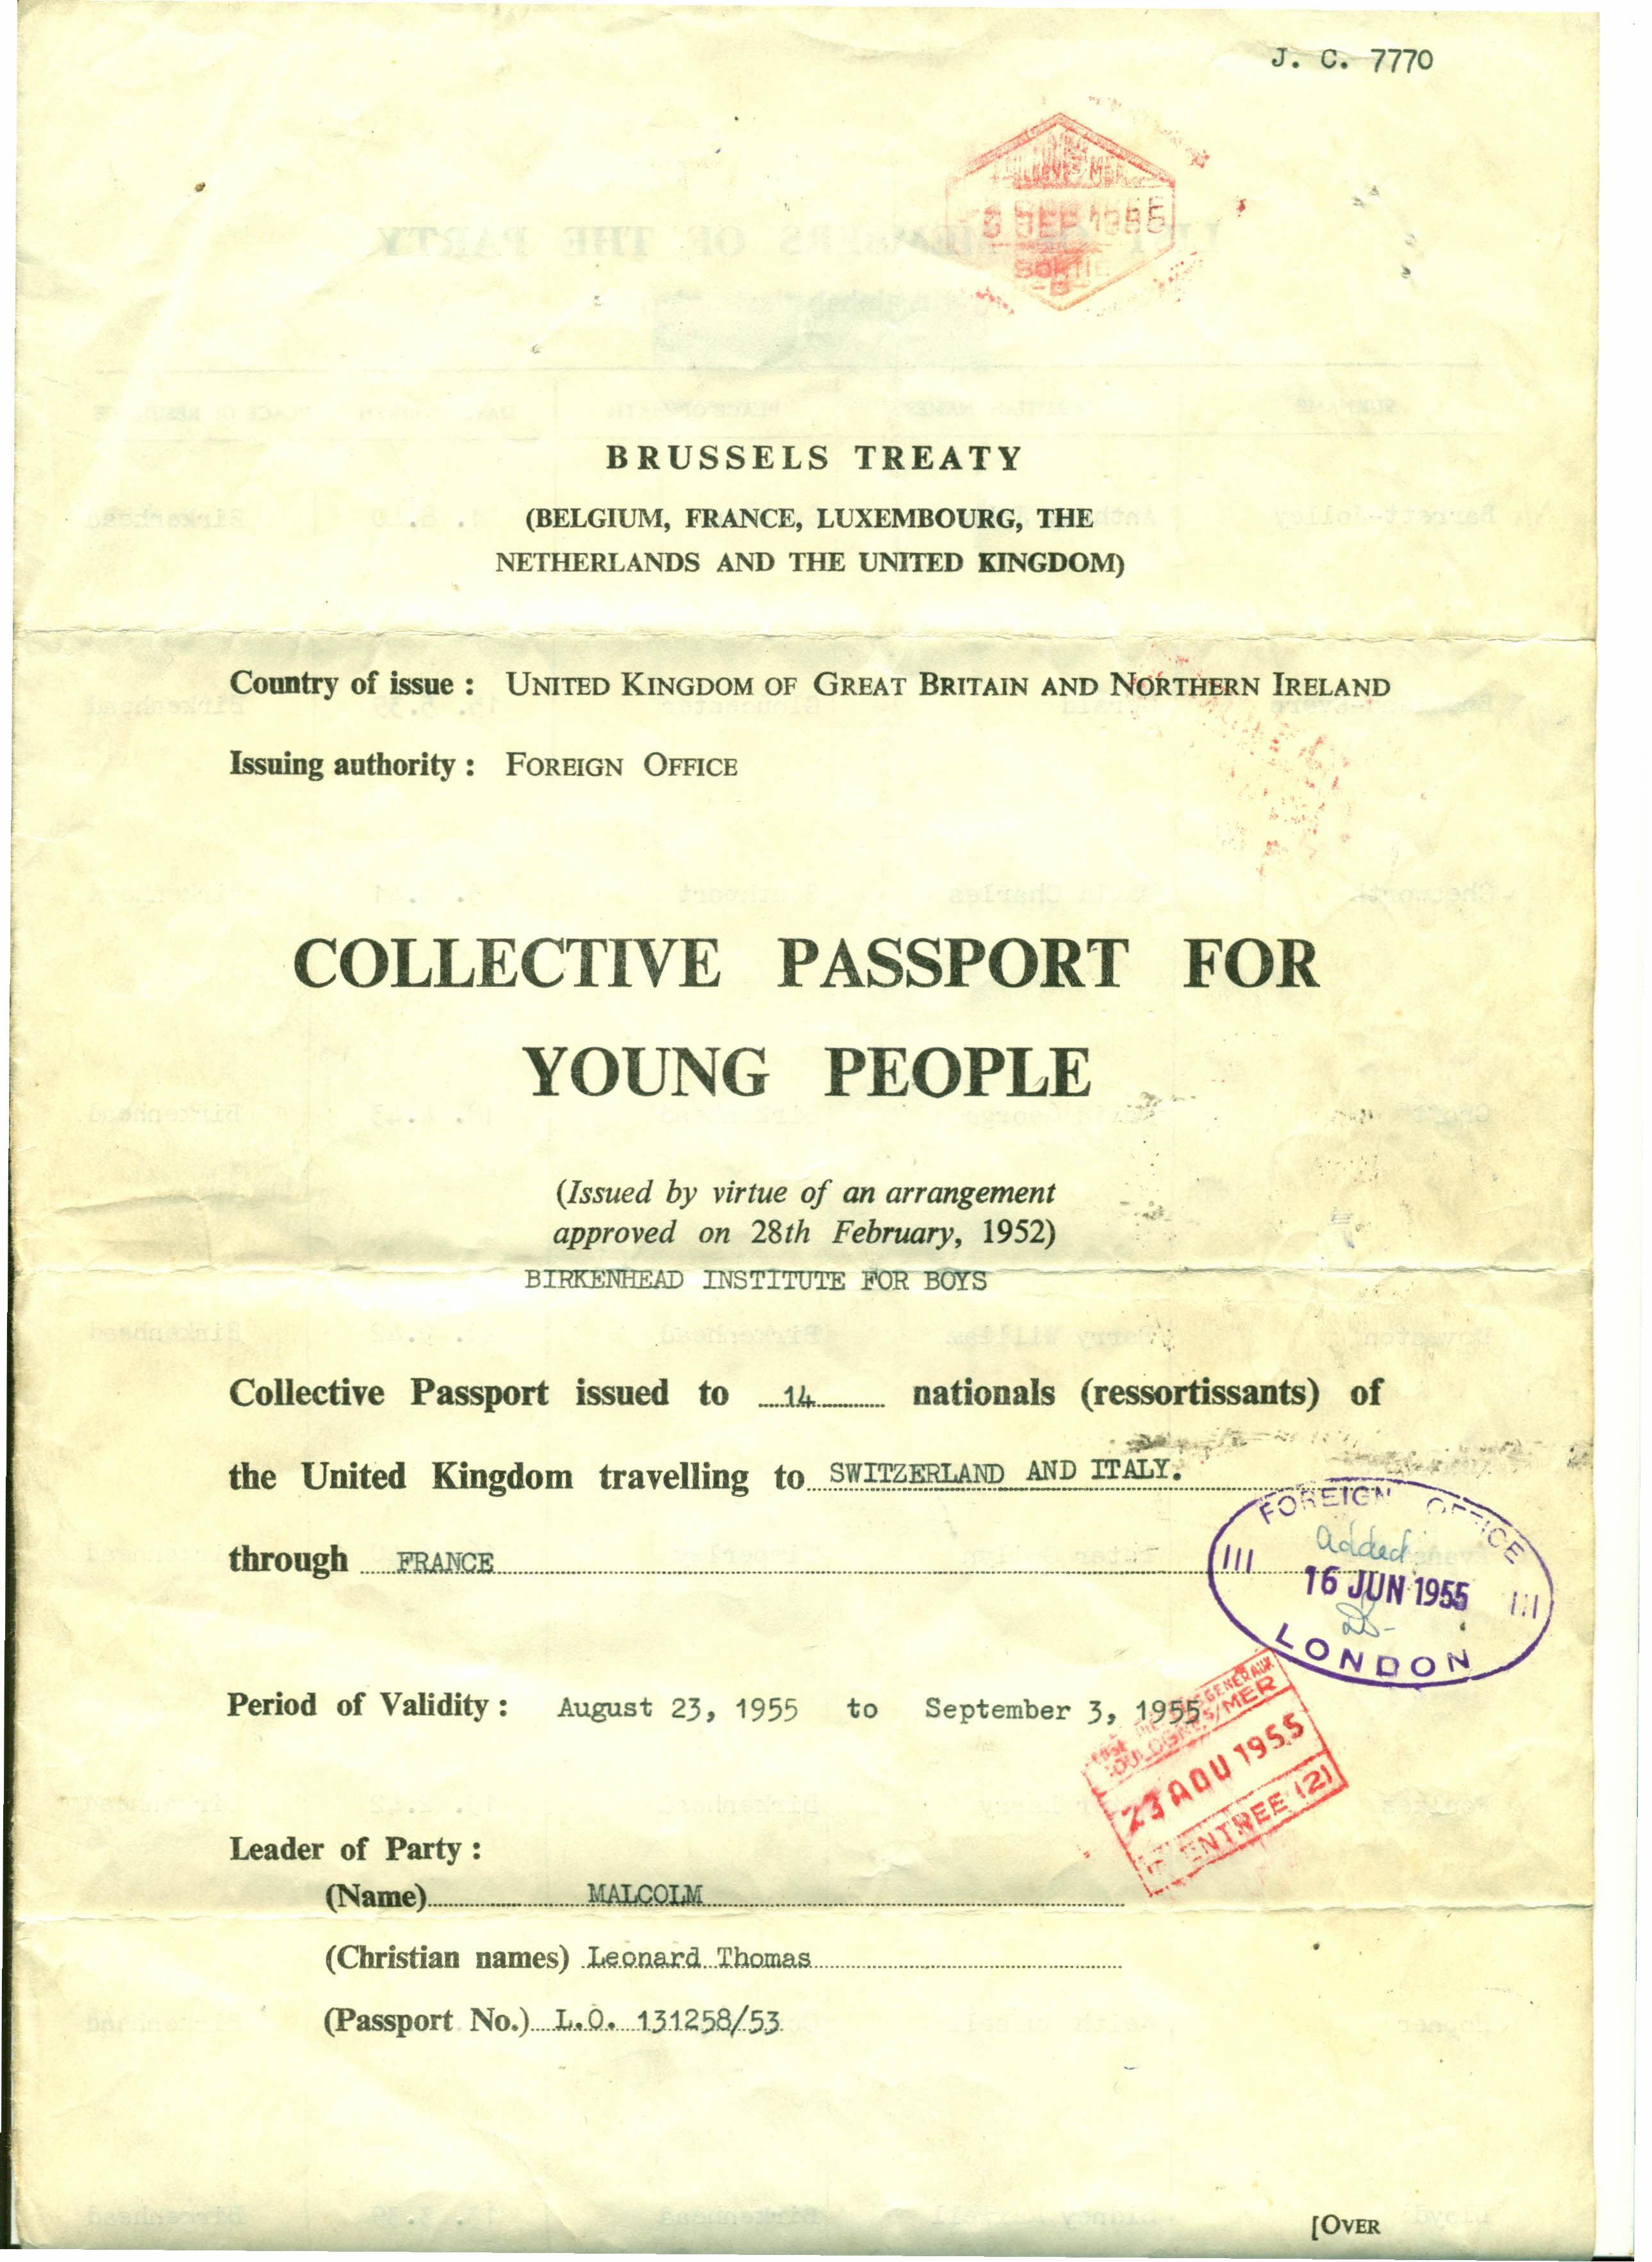 Collective Passport for 1955 Switzerland and Italy